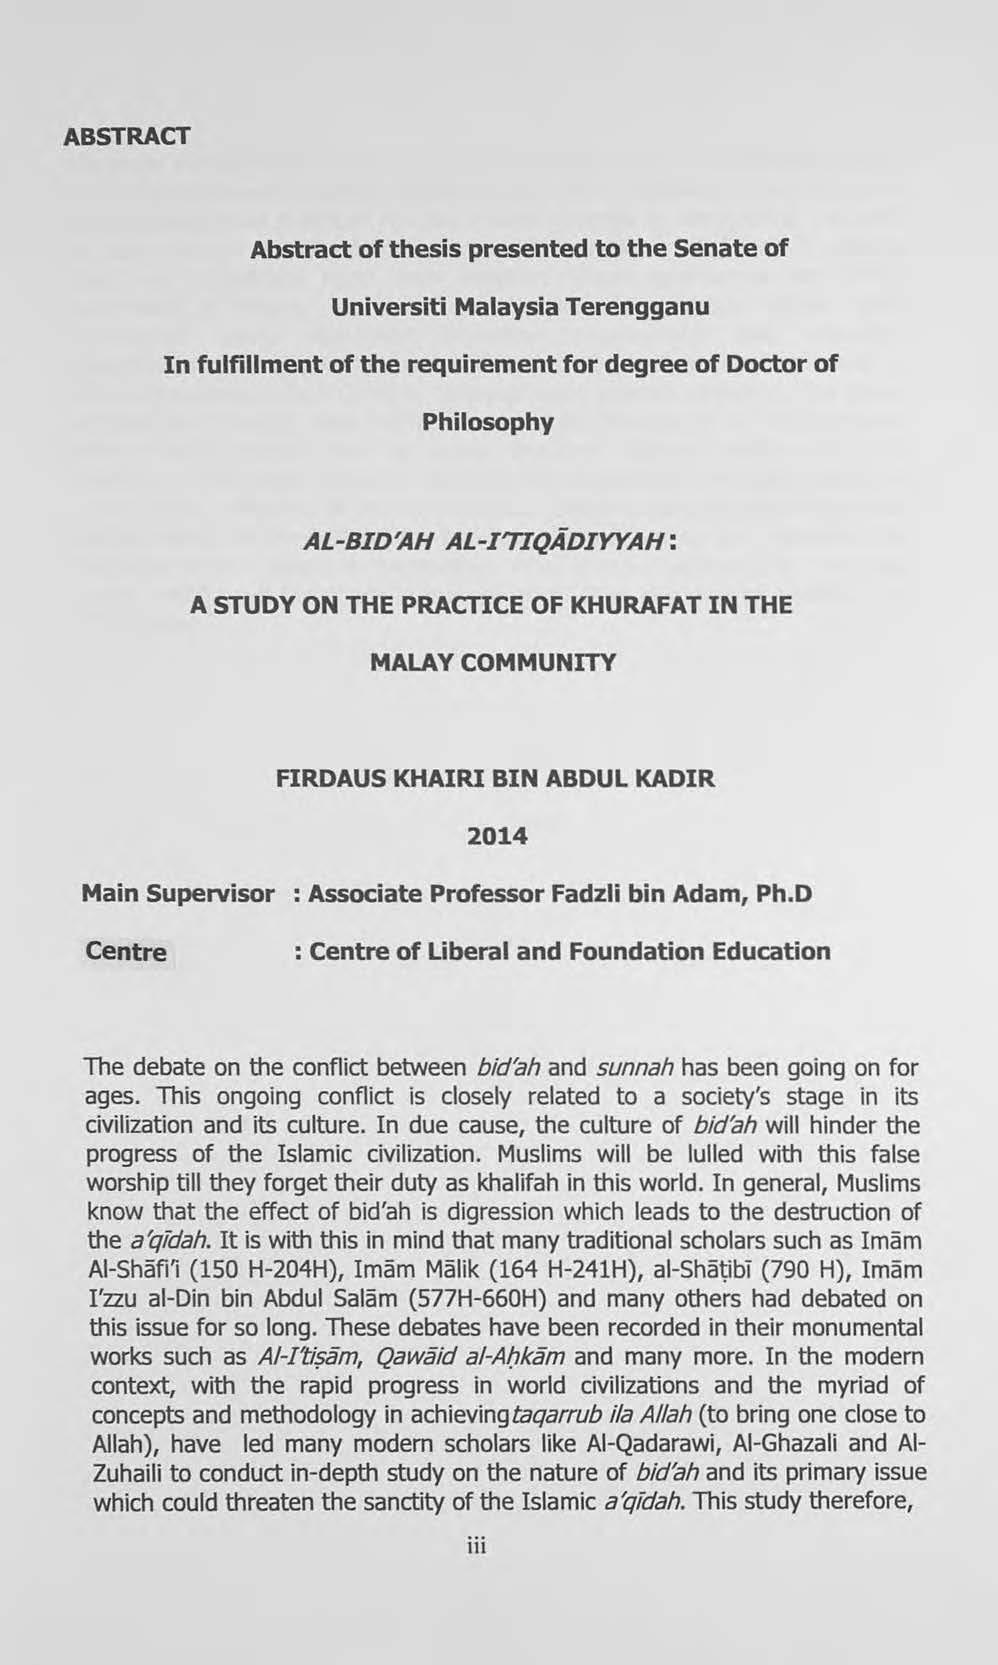 ABSTRACT Abstract of thesis presented to the Senate of Universiti Malaysia Terengganu In fulfillment of the requirement for degree of Doctor of Philosophy AL-BID'AH AL-I7IQADIYYAH: A STUDY ON THE